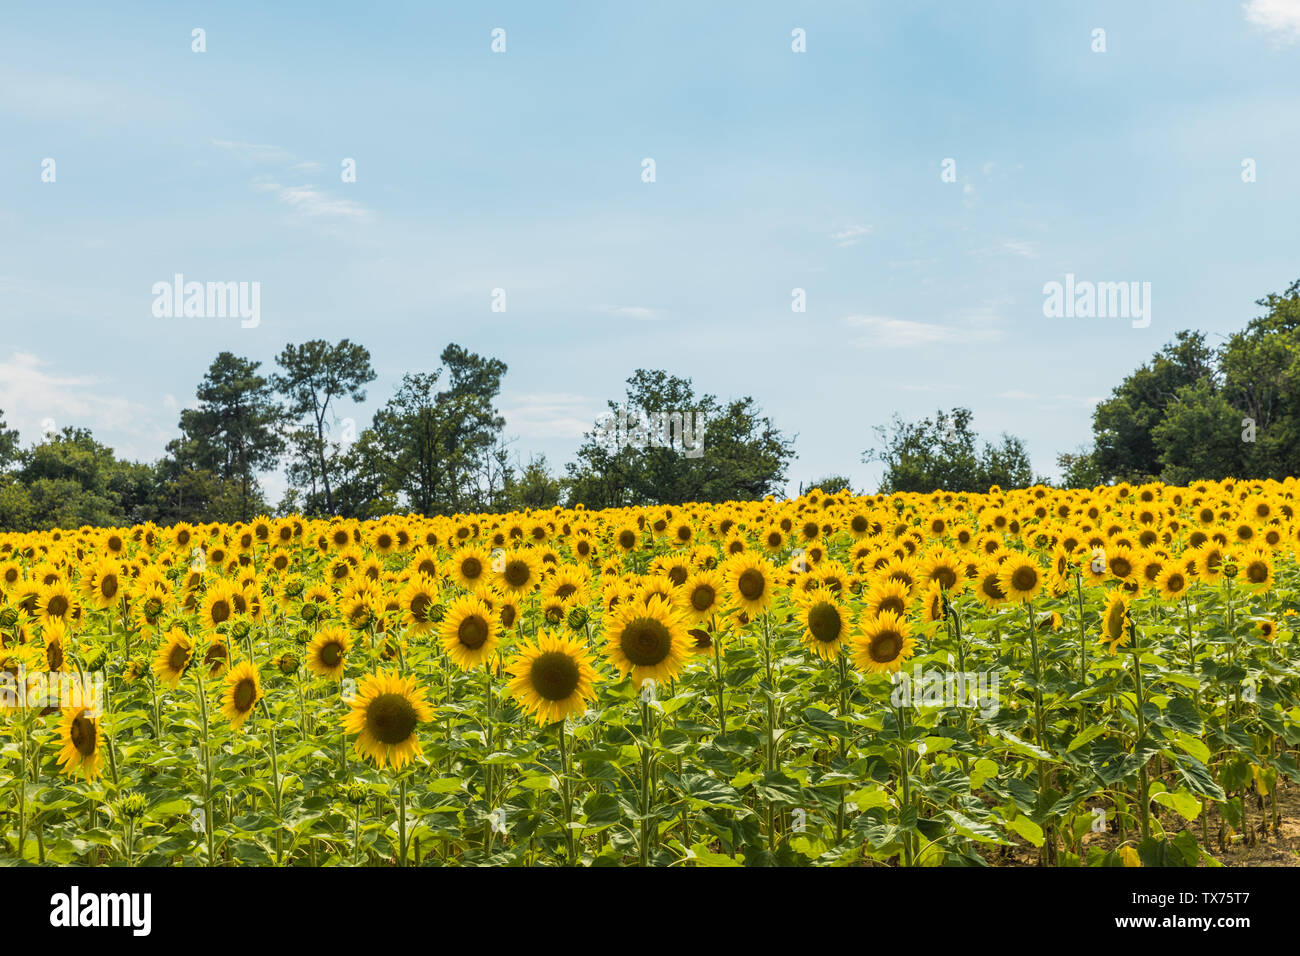 Sunflower field with cloudy blue sky Stock Photo